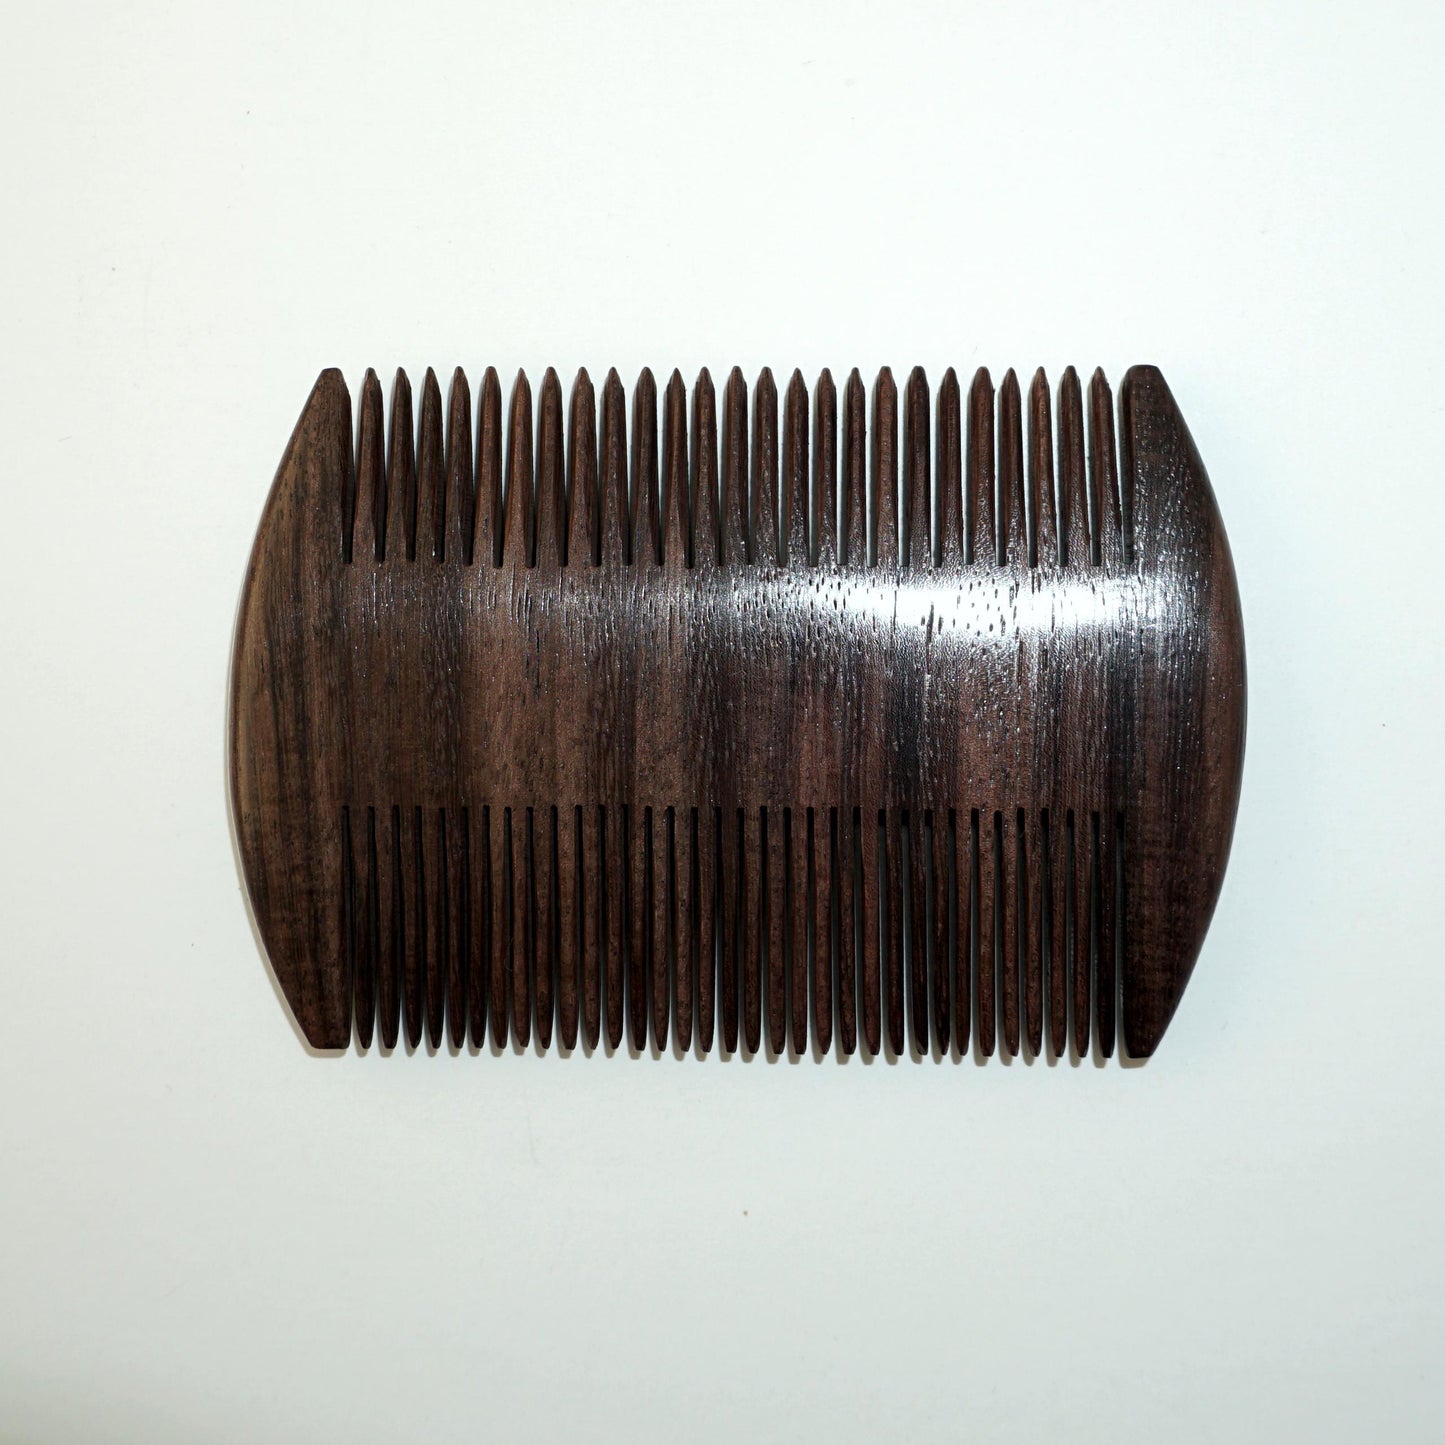 4in Rose Wood Beard/Mustache Comb  - CLOSEOUT, LIMITED STOCK AVAILABLE